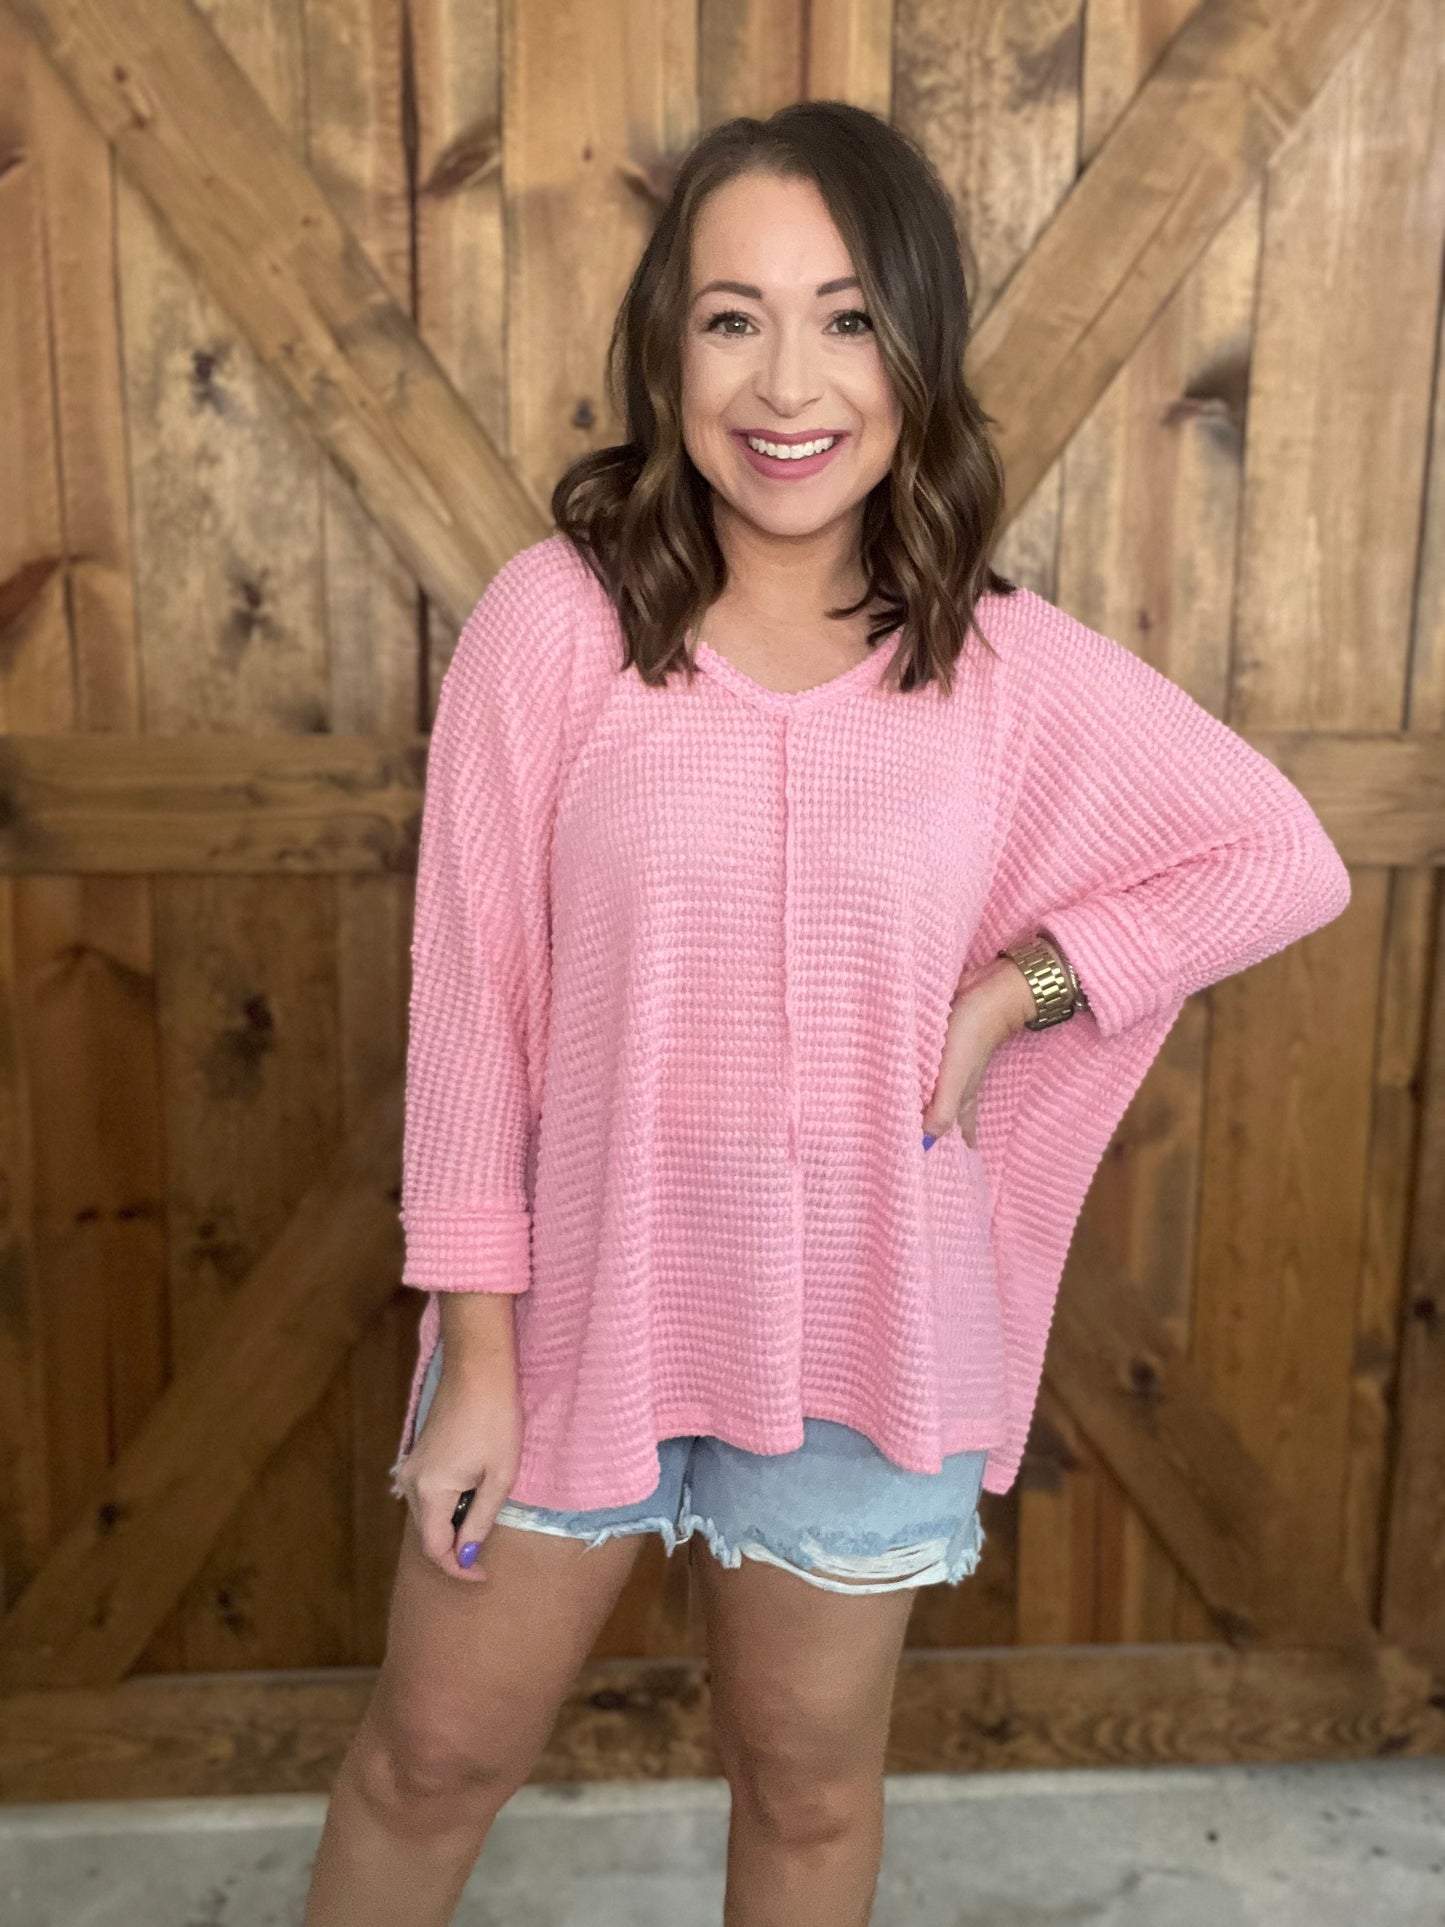 Slide into Style Top - Dk Pink